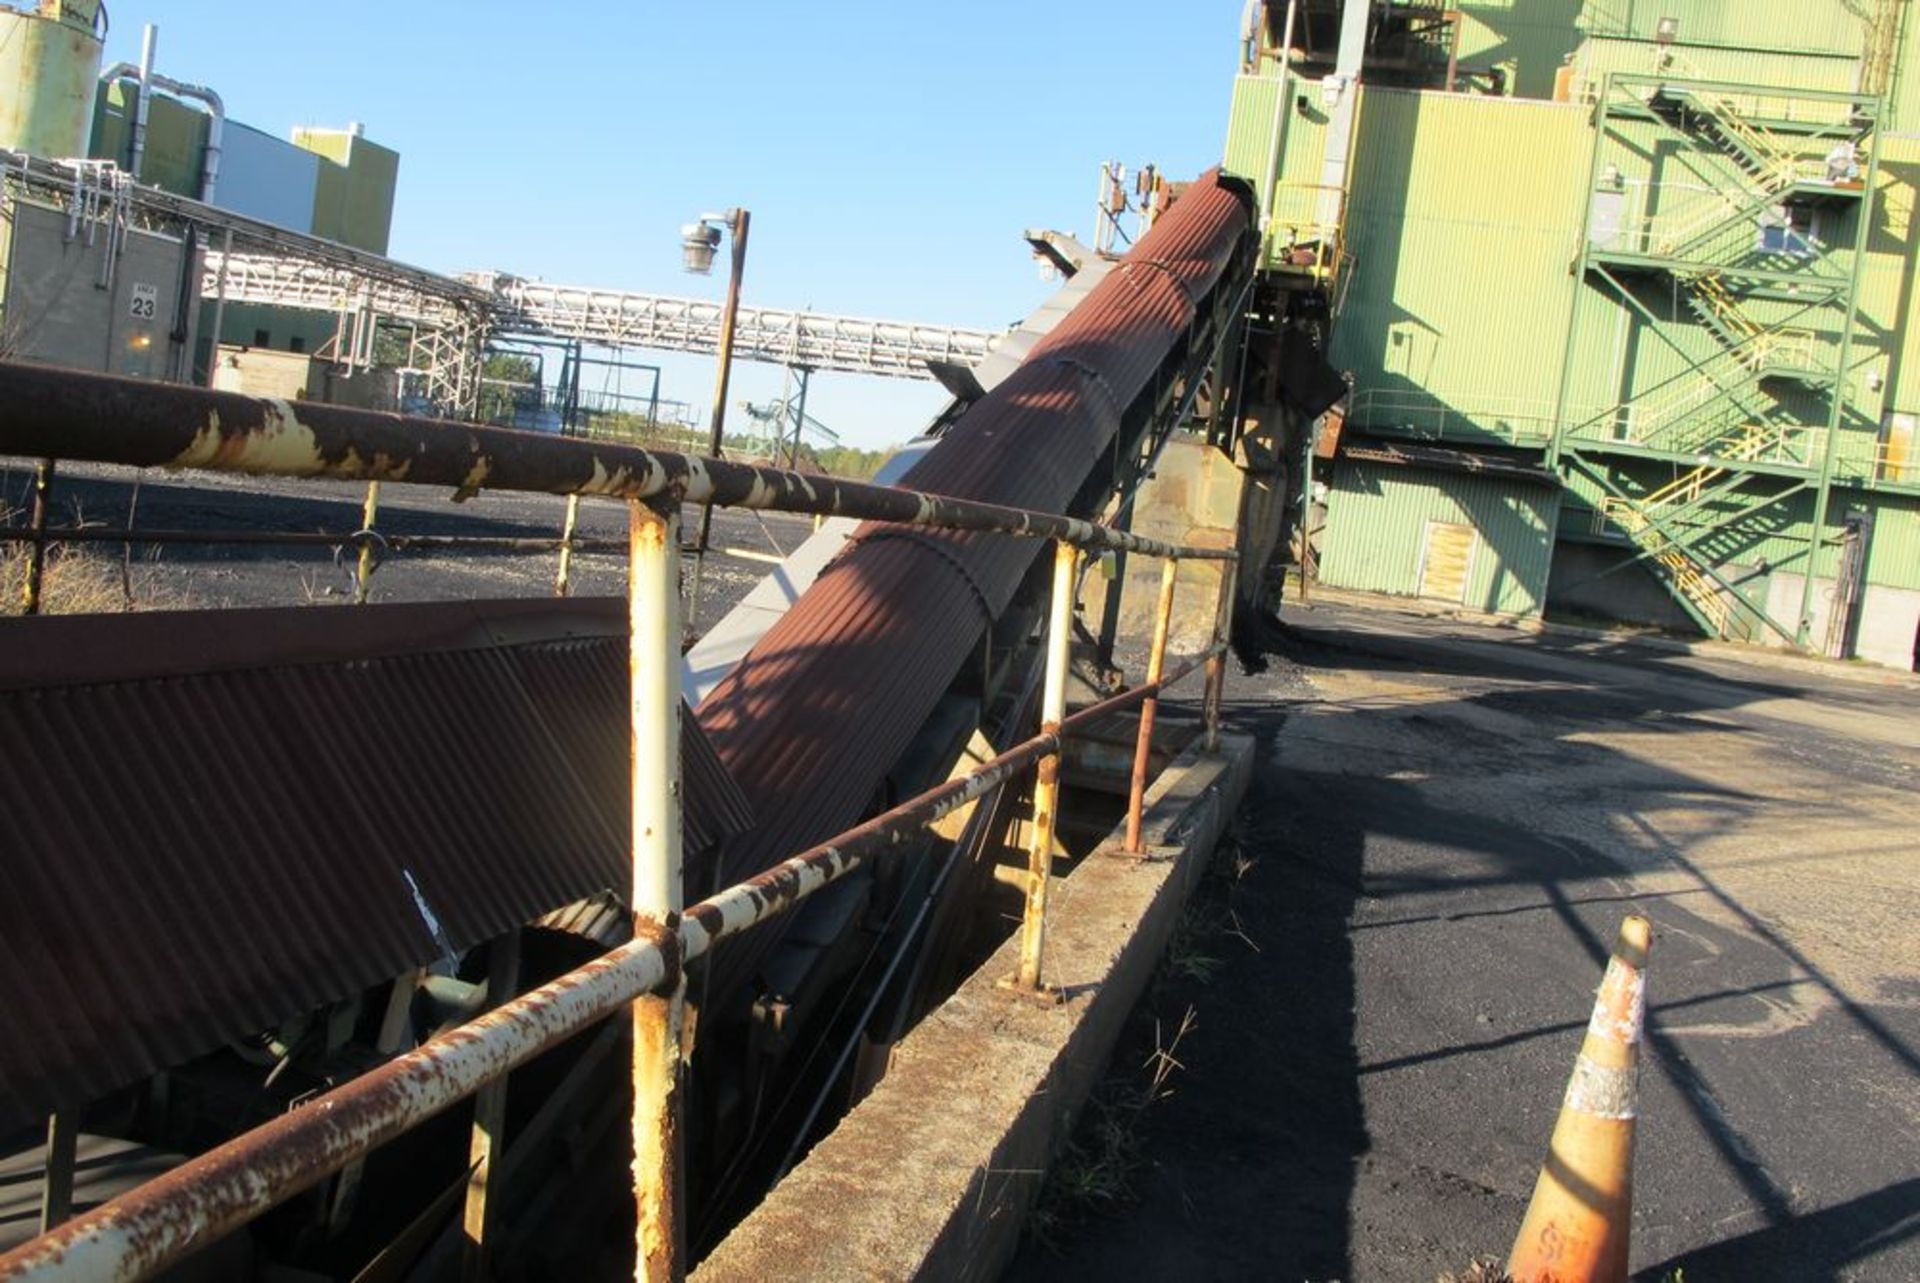 LOT OF 3 COAL TRANSFER INCLINE CONVEYORS, 2 HOPPERSAND COAL CRUSHER SUPPORT COLUMNS, COAL PITTO - Image 2 of 8